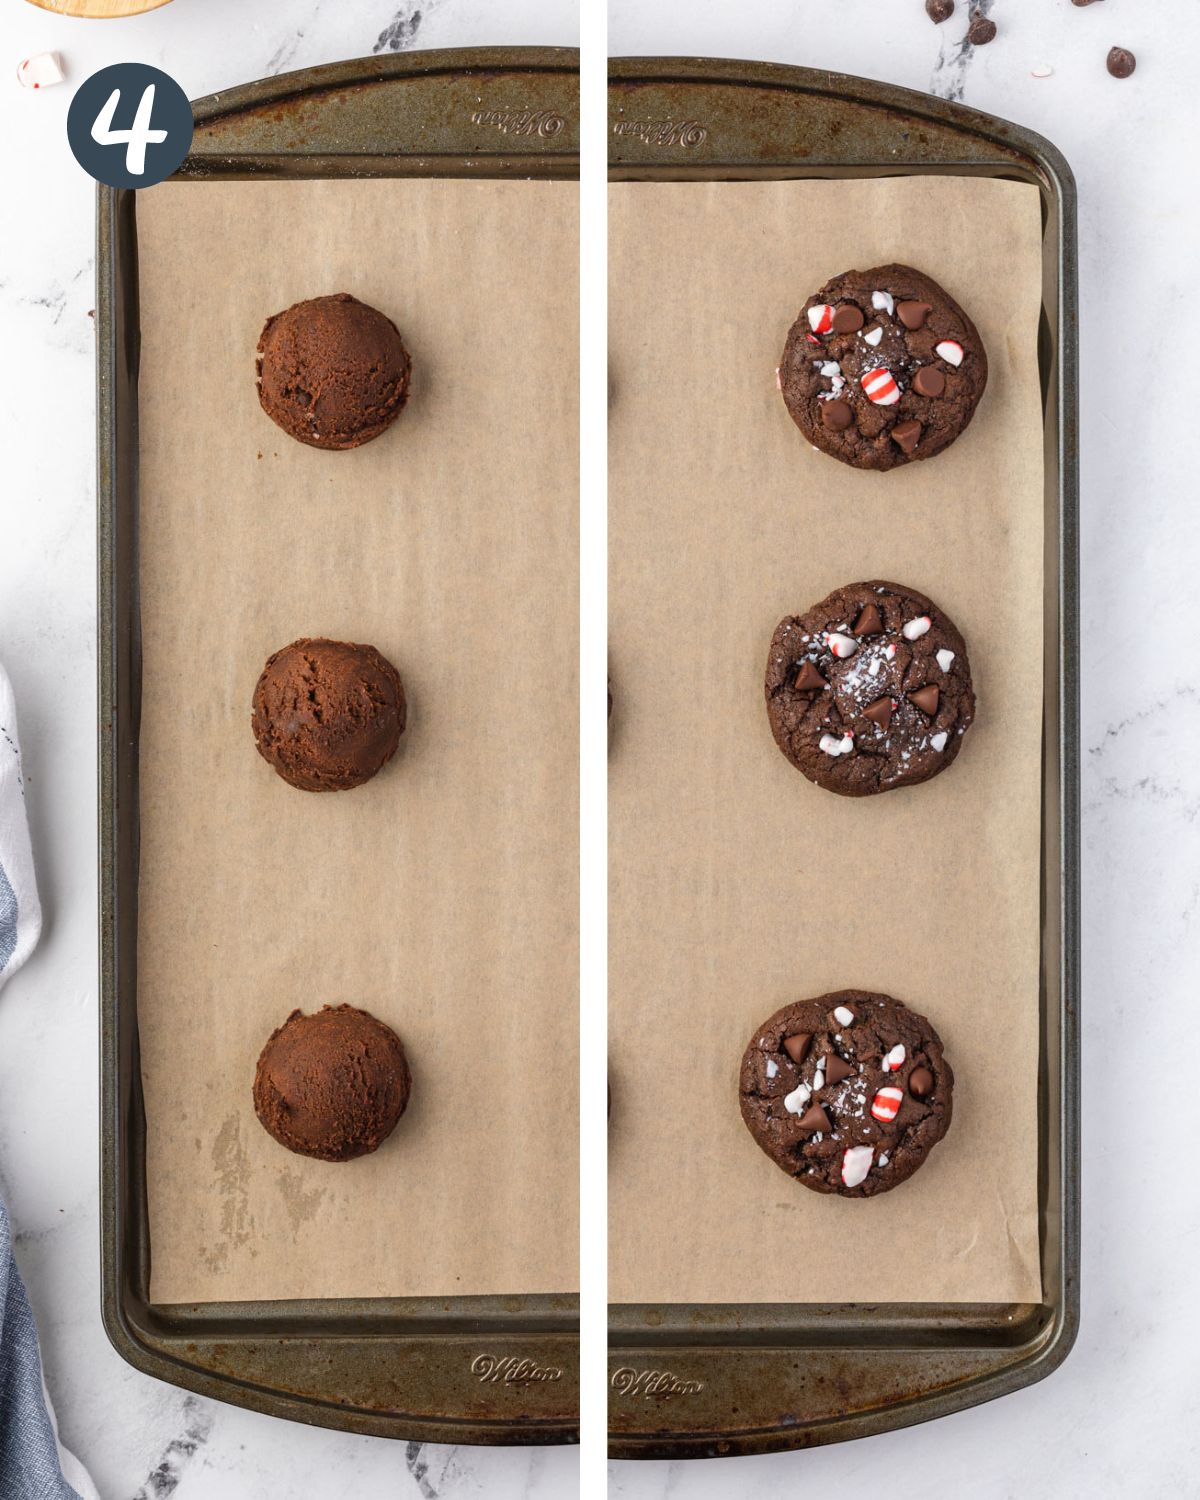 Split photo showing raw cookie dough balls on left and baked cookies on right.